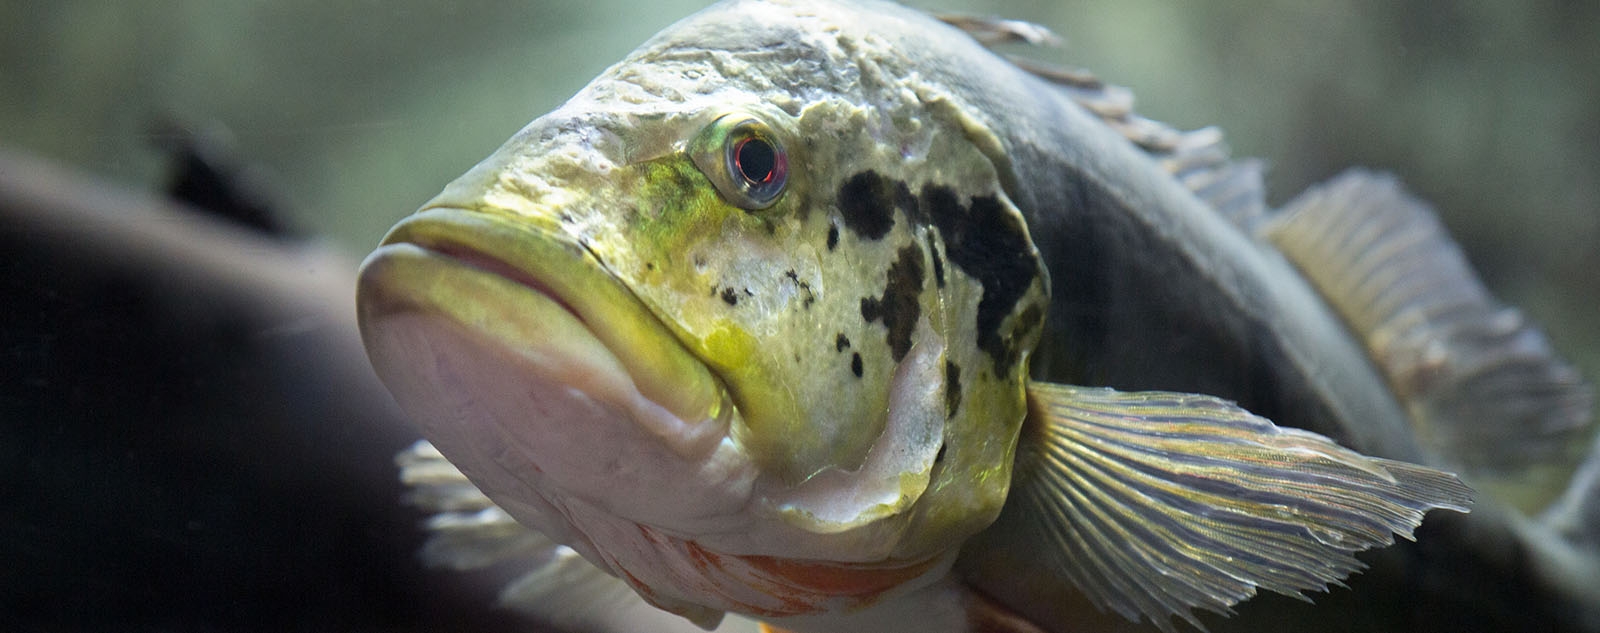 close-up of fish's face as it swims